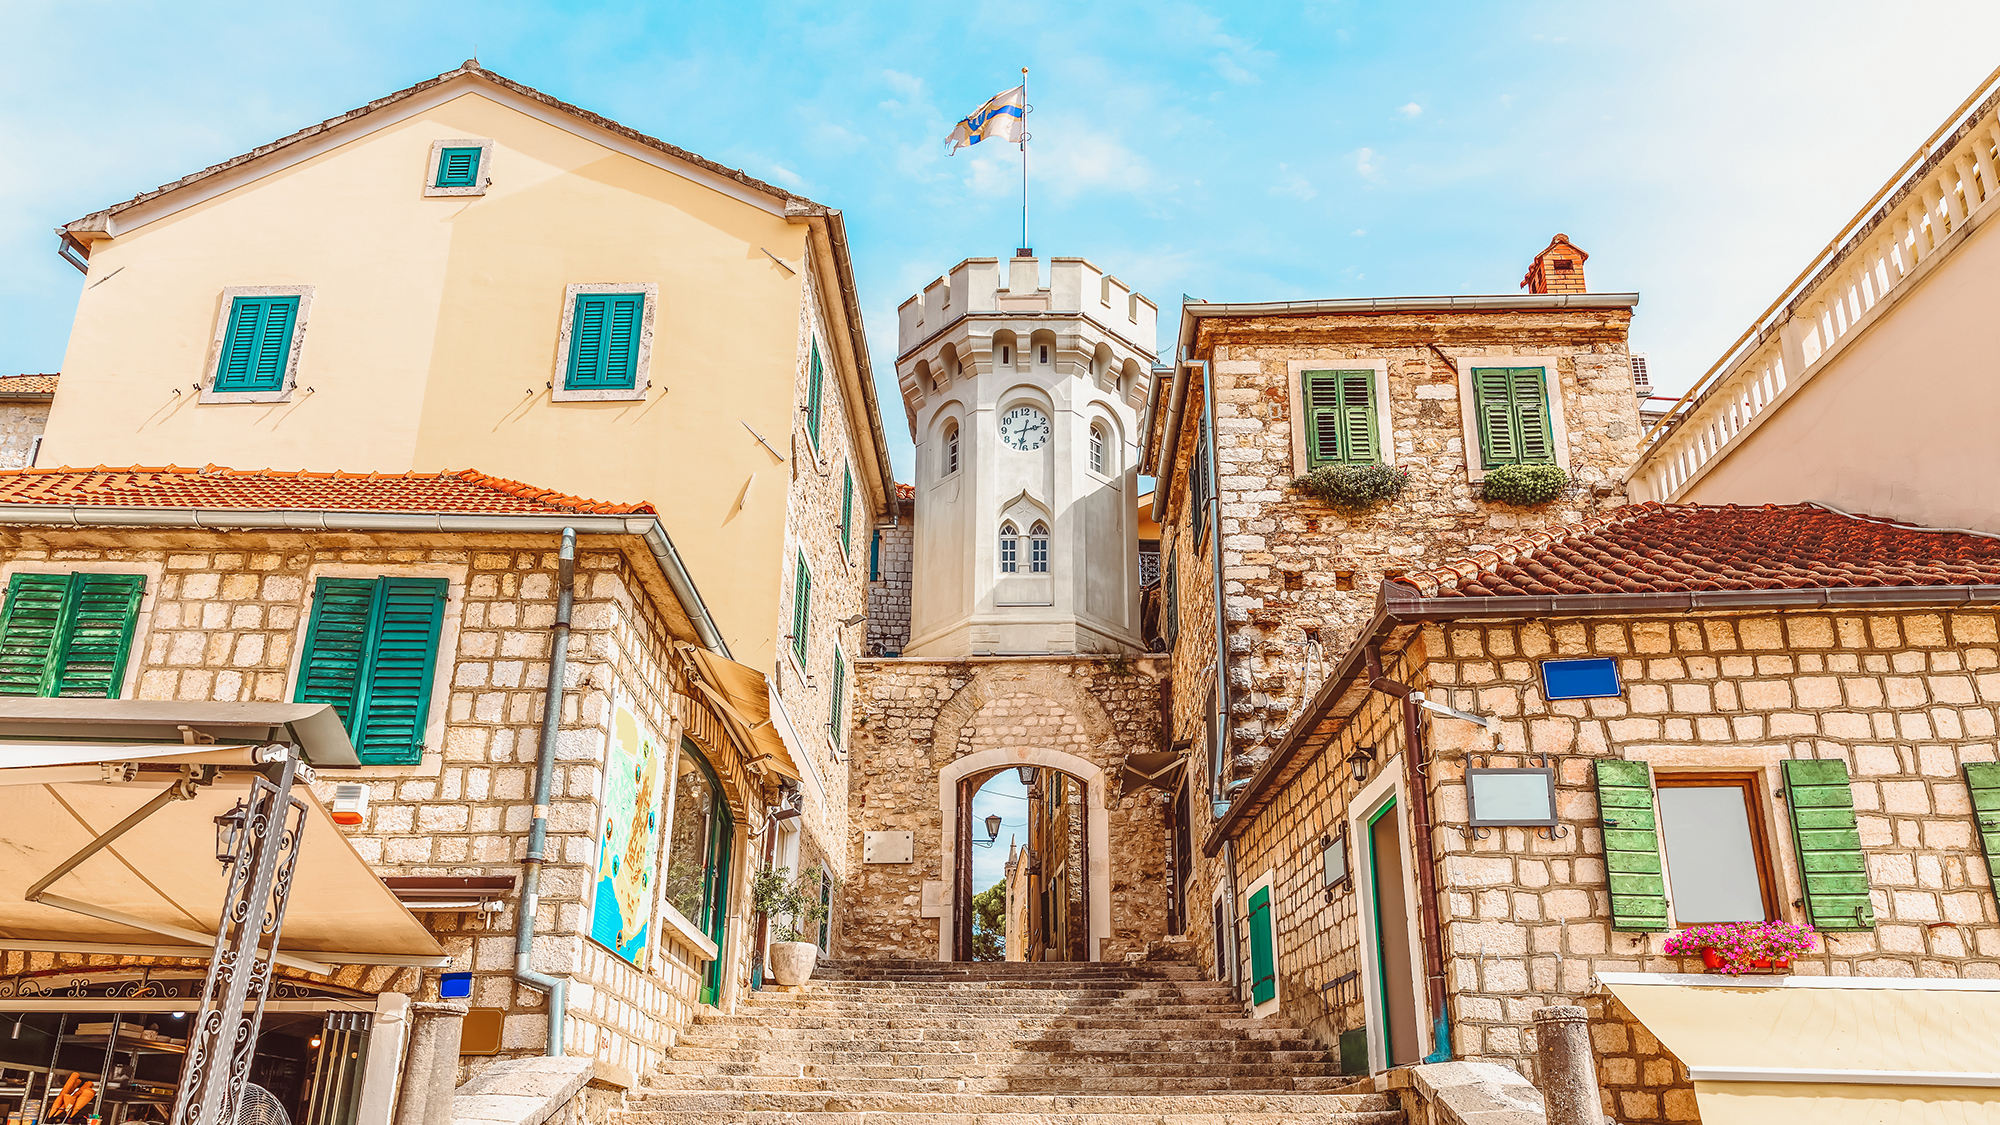 The clock-tower and the gate to the Old town of Herceg Novi, Montenegro